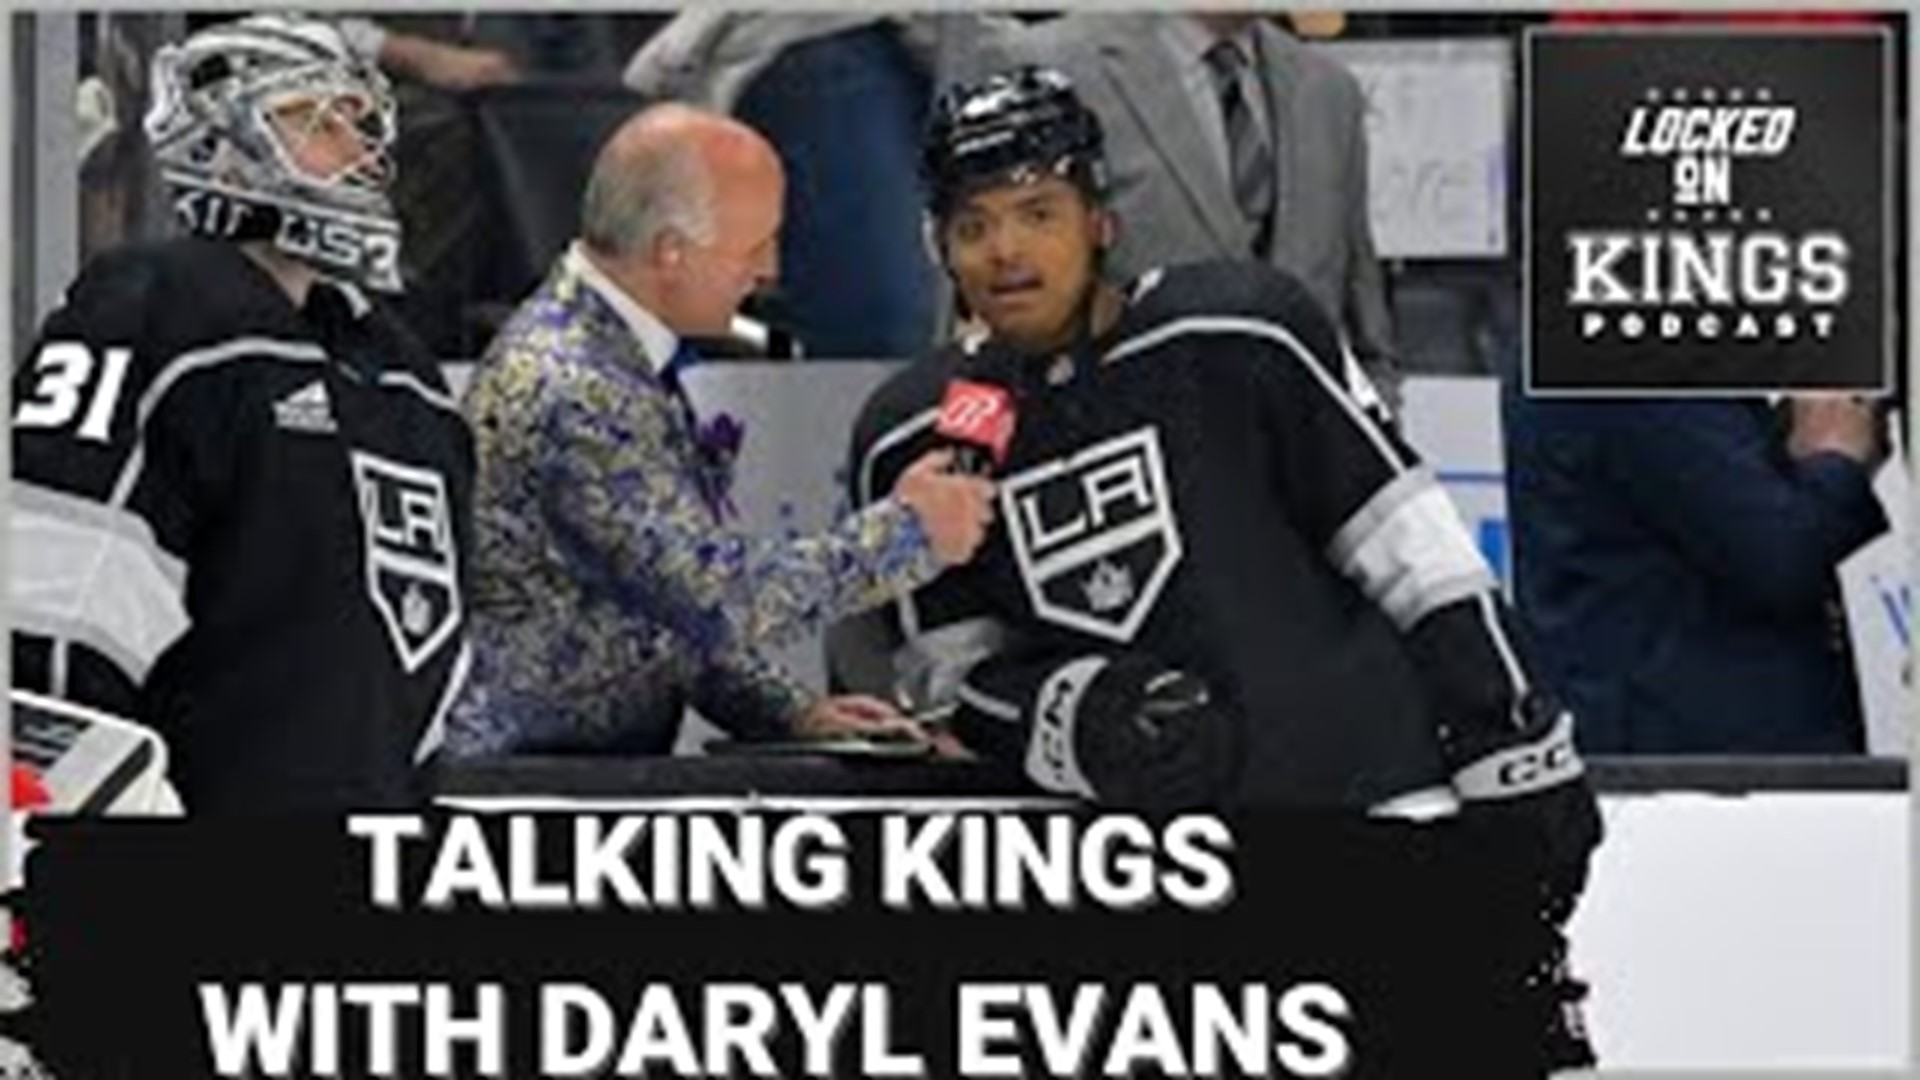 Former Kings player and current analyst Daryl Evans joins us to talk about how the Kings are currently playing, specific players in the lineup and possible opponents